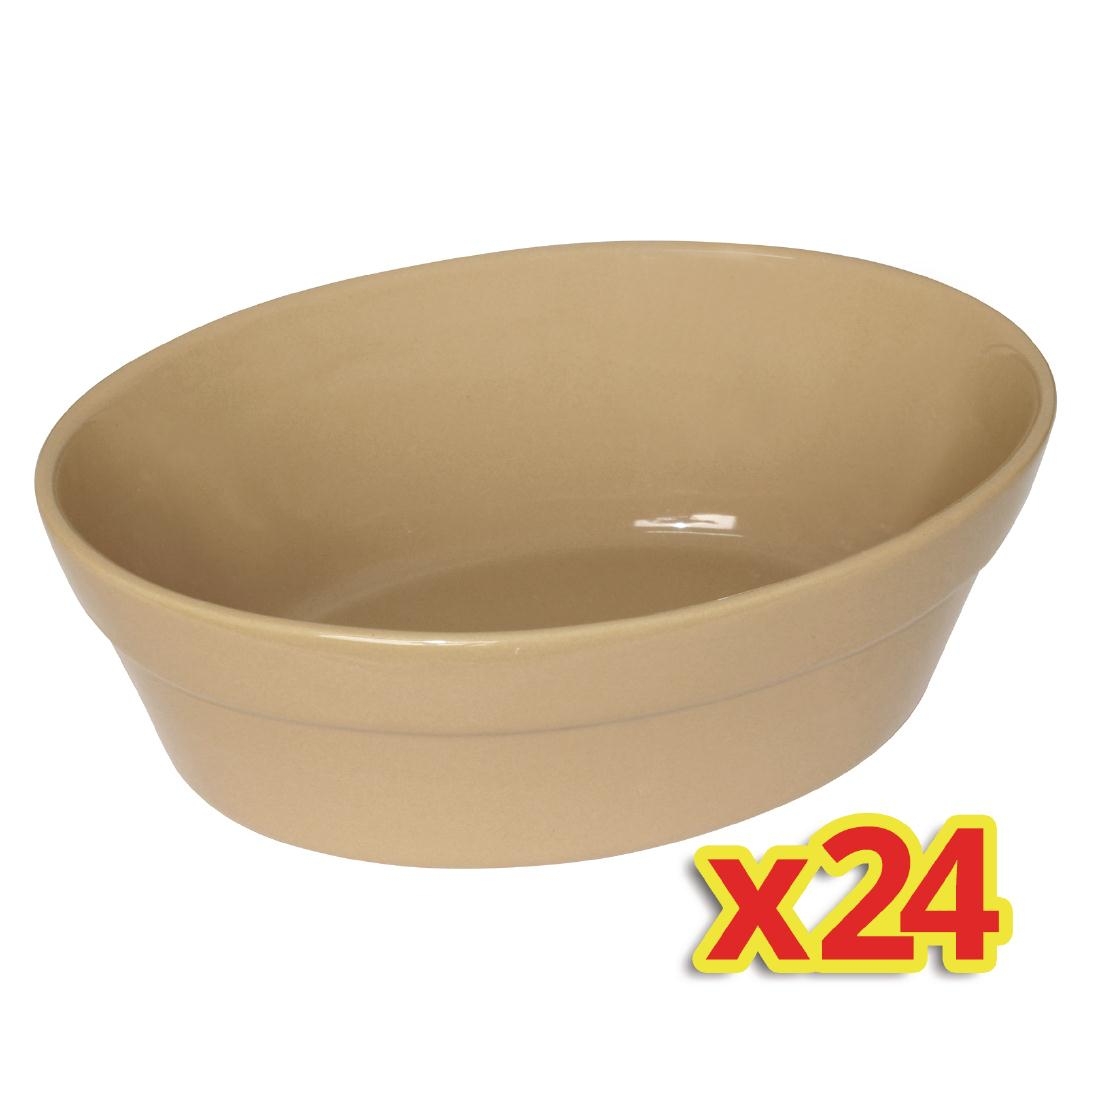 Special Offer - 4x Box of 6 Olympia Oval Pie Bowls